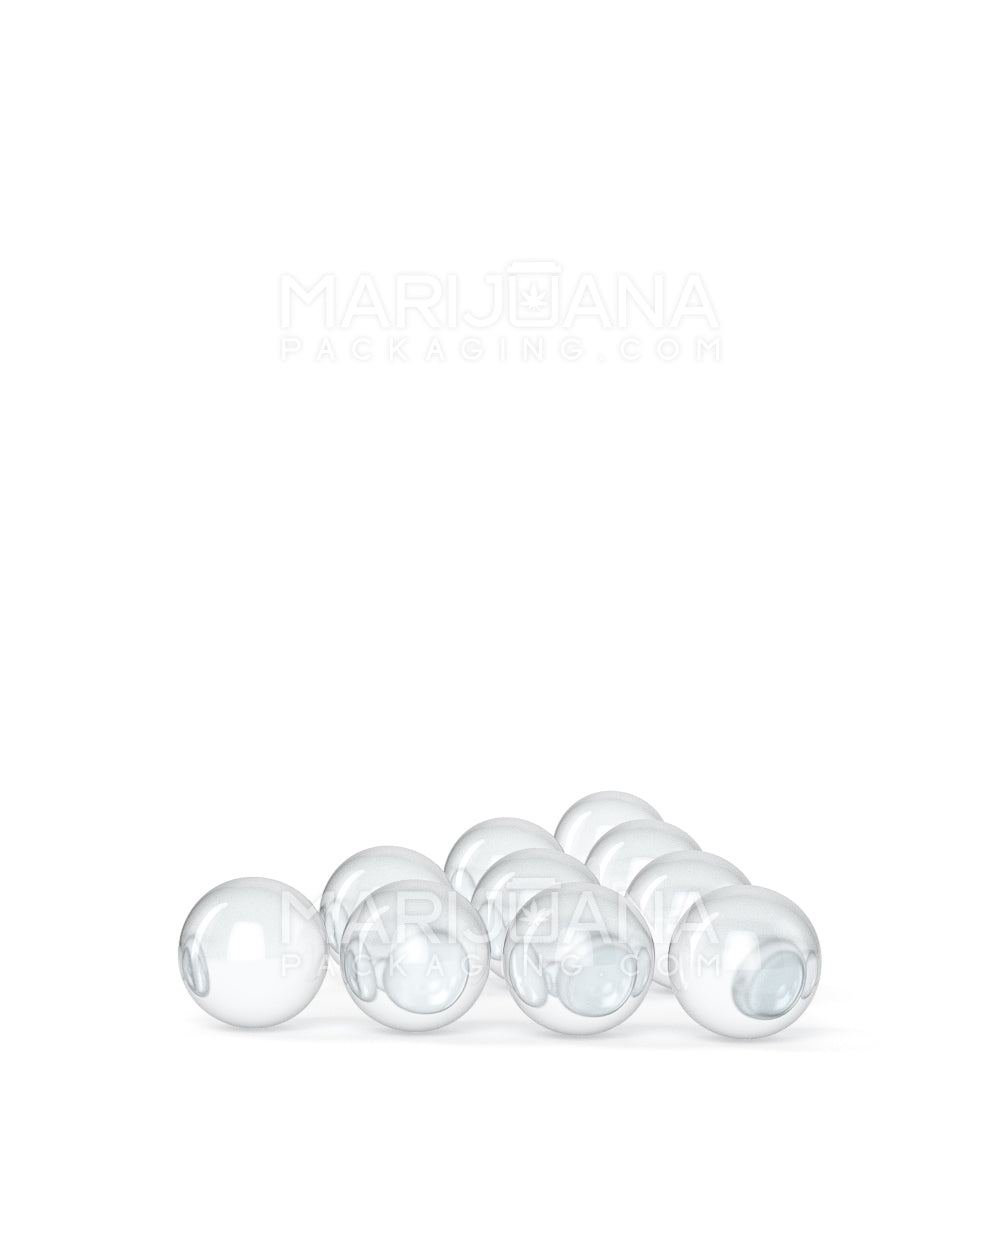 Thick 6mm Quartz Dab Pearls for Banger Nails - 10 Count - 4